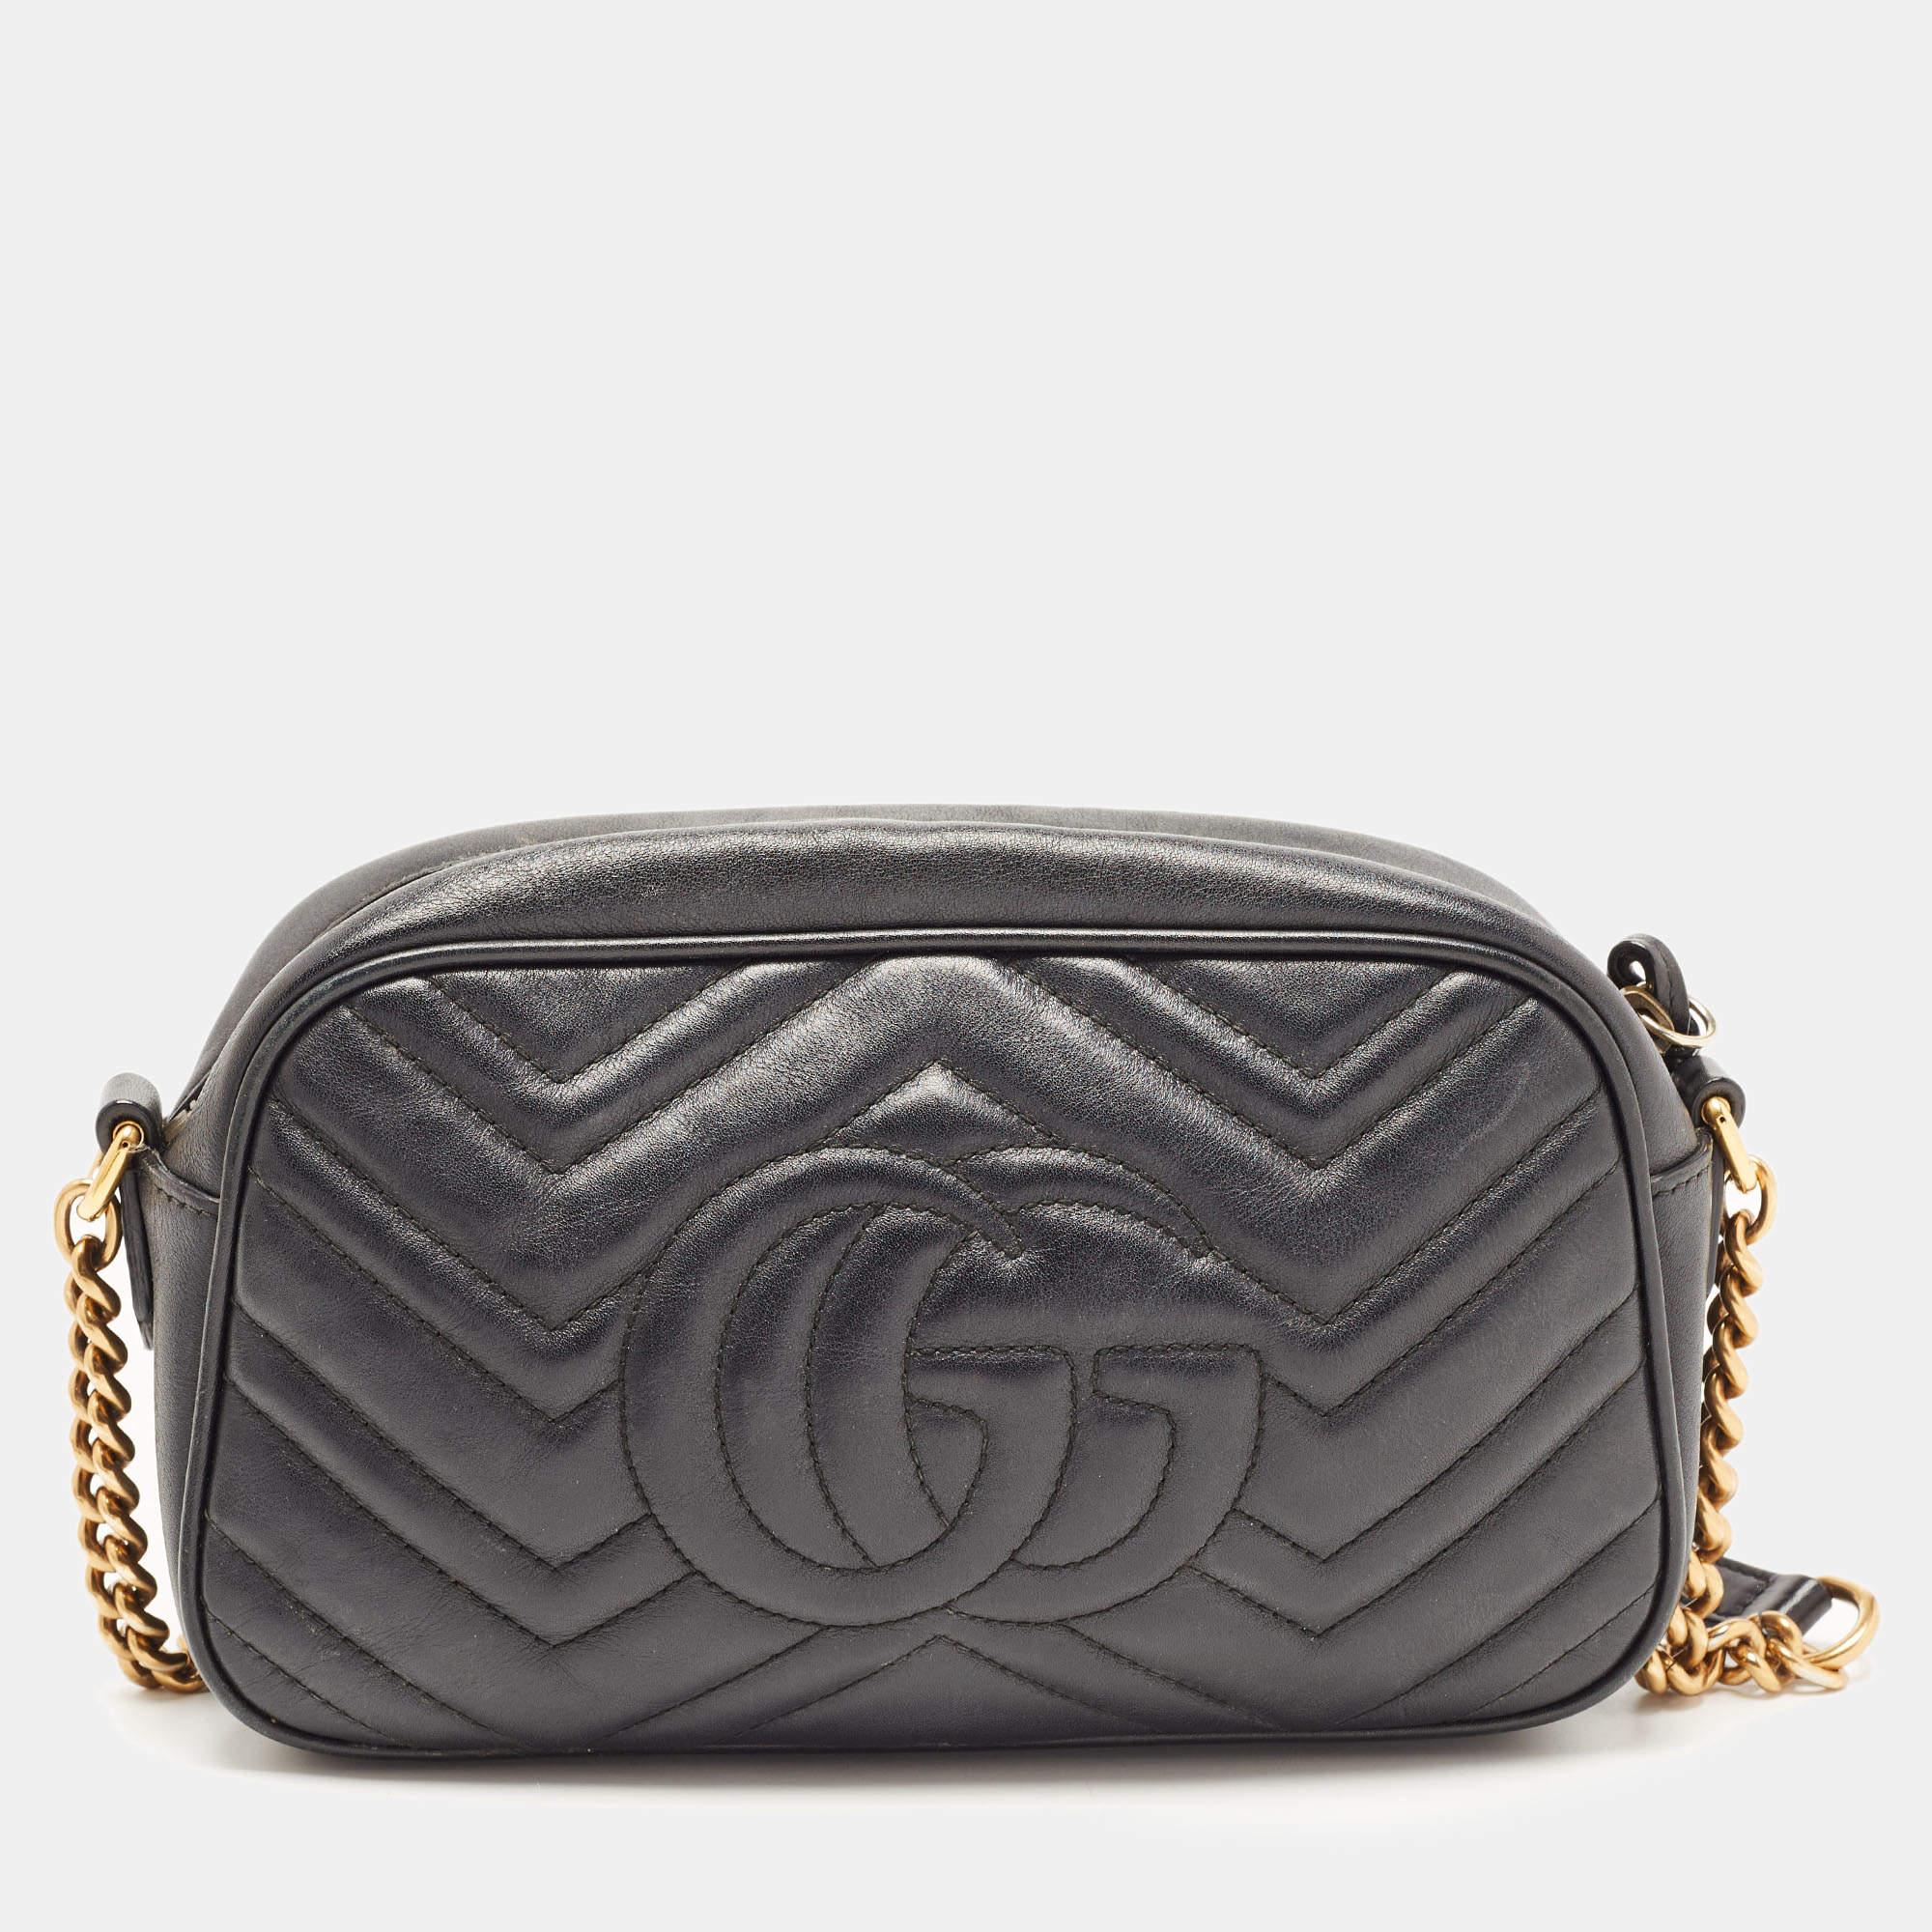 Innovative and sophisticated, this Gucci Marmont camera bag evokes a sense of classic glamour. Finely crafted from matelassé leather, it gets a luxe update with a 'GG' motif on the front and features an Alcantara-lined interior. The chain-leather